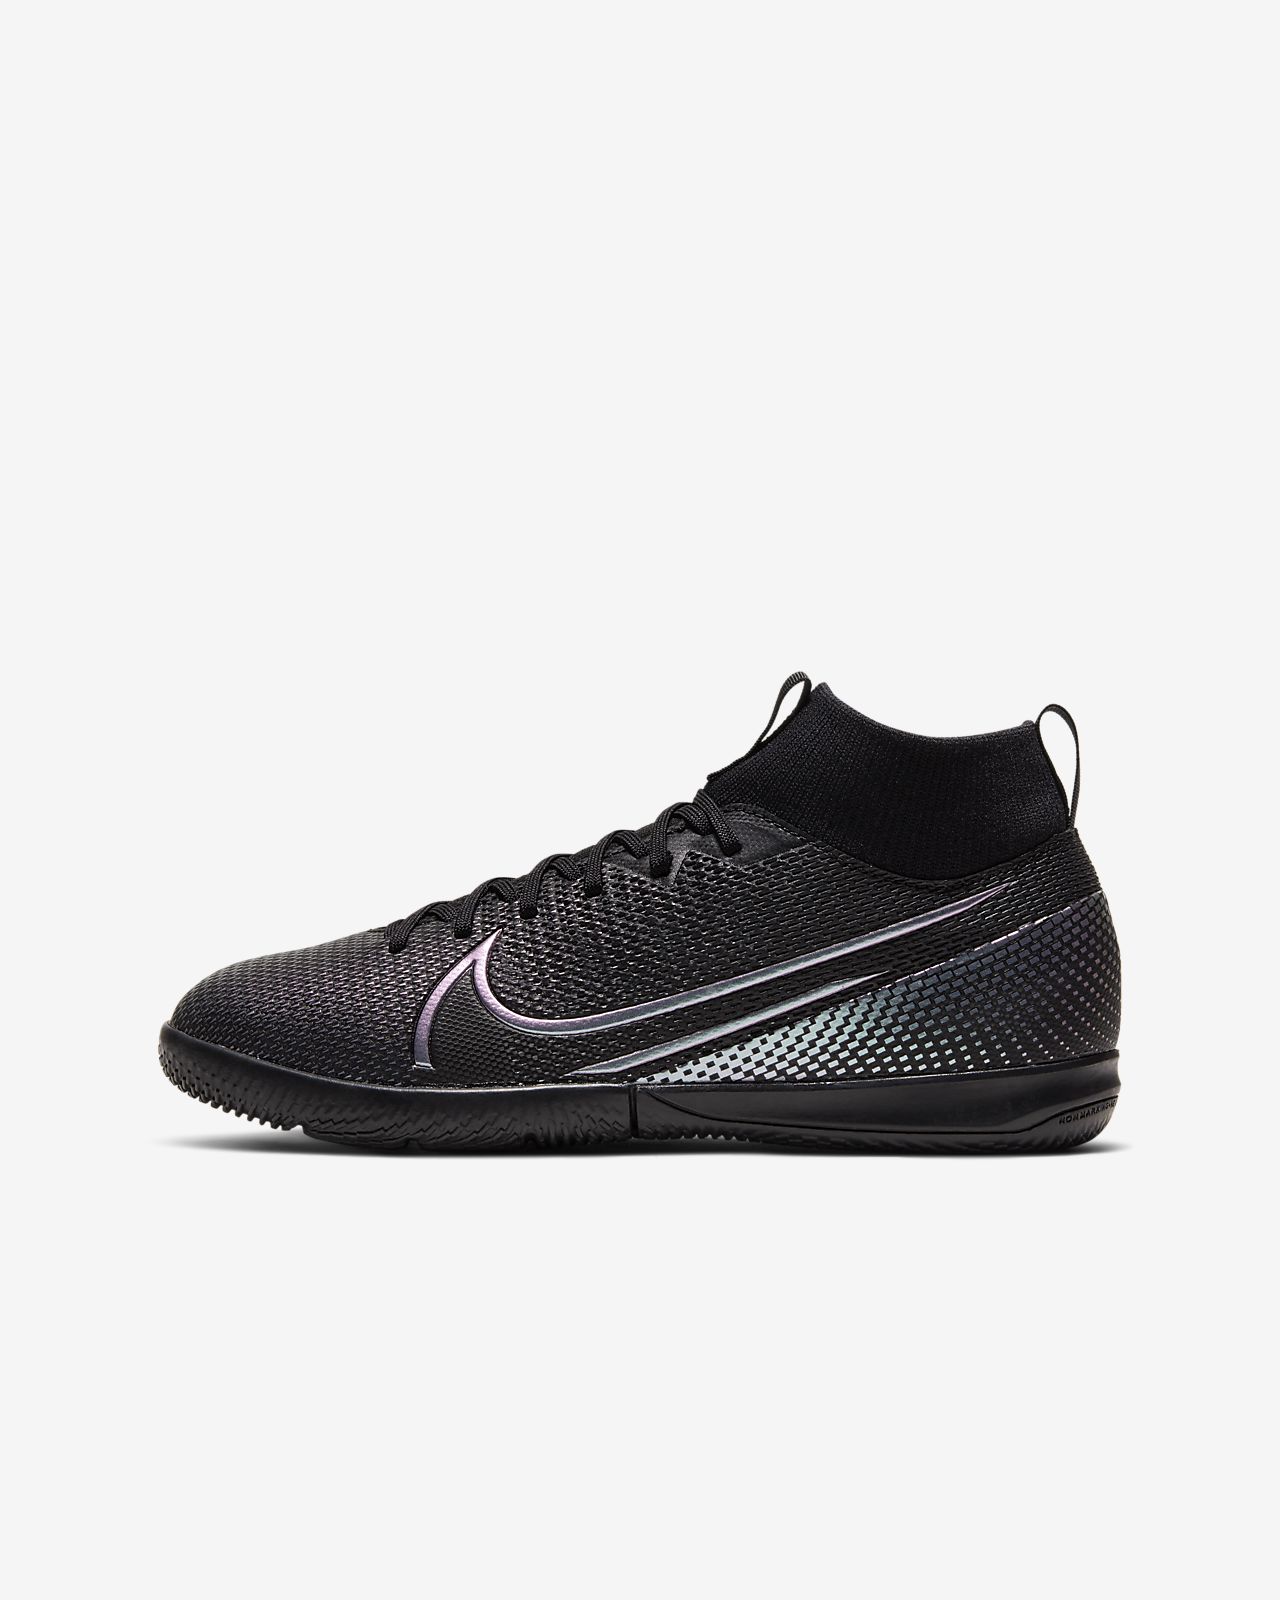 Nike Performance Mercurial Superfly 7 Elite AG Pro. Outfitter